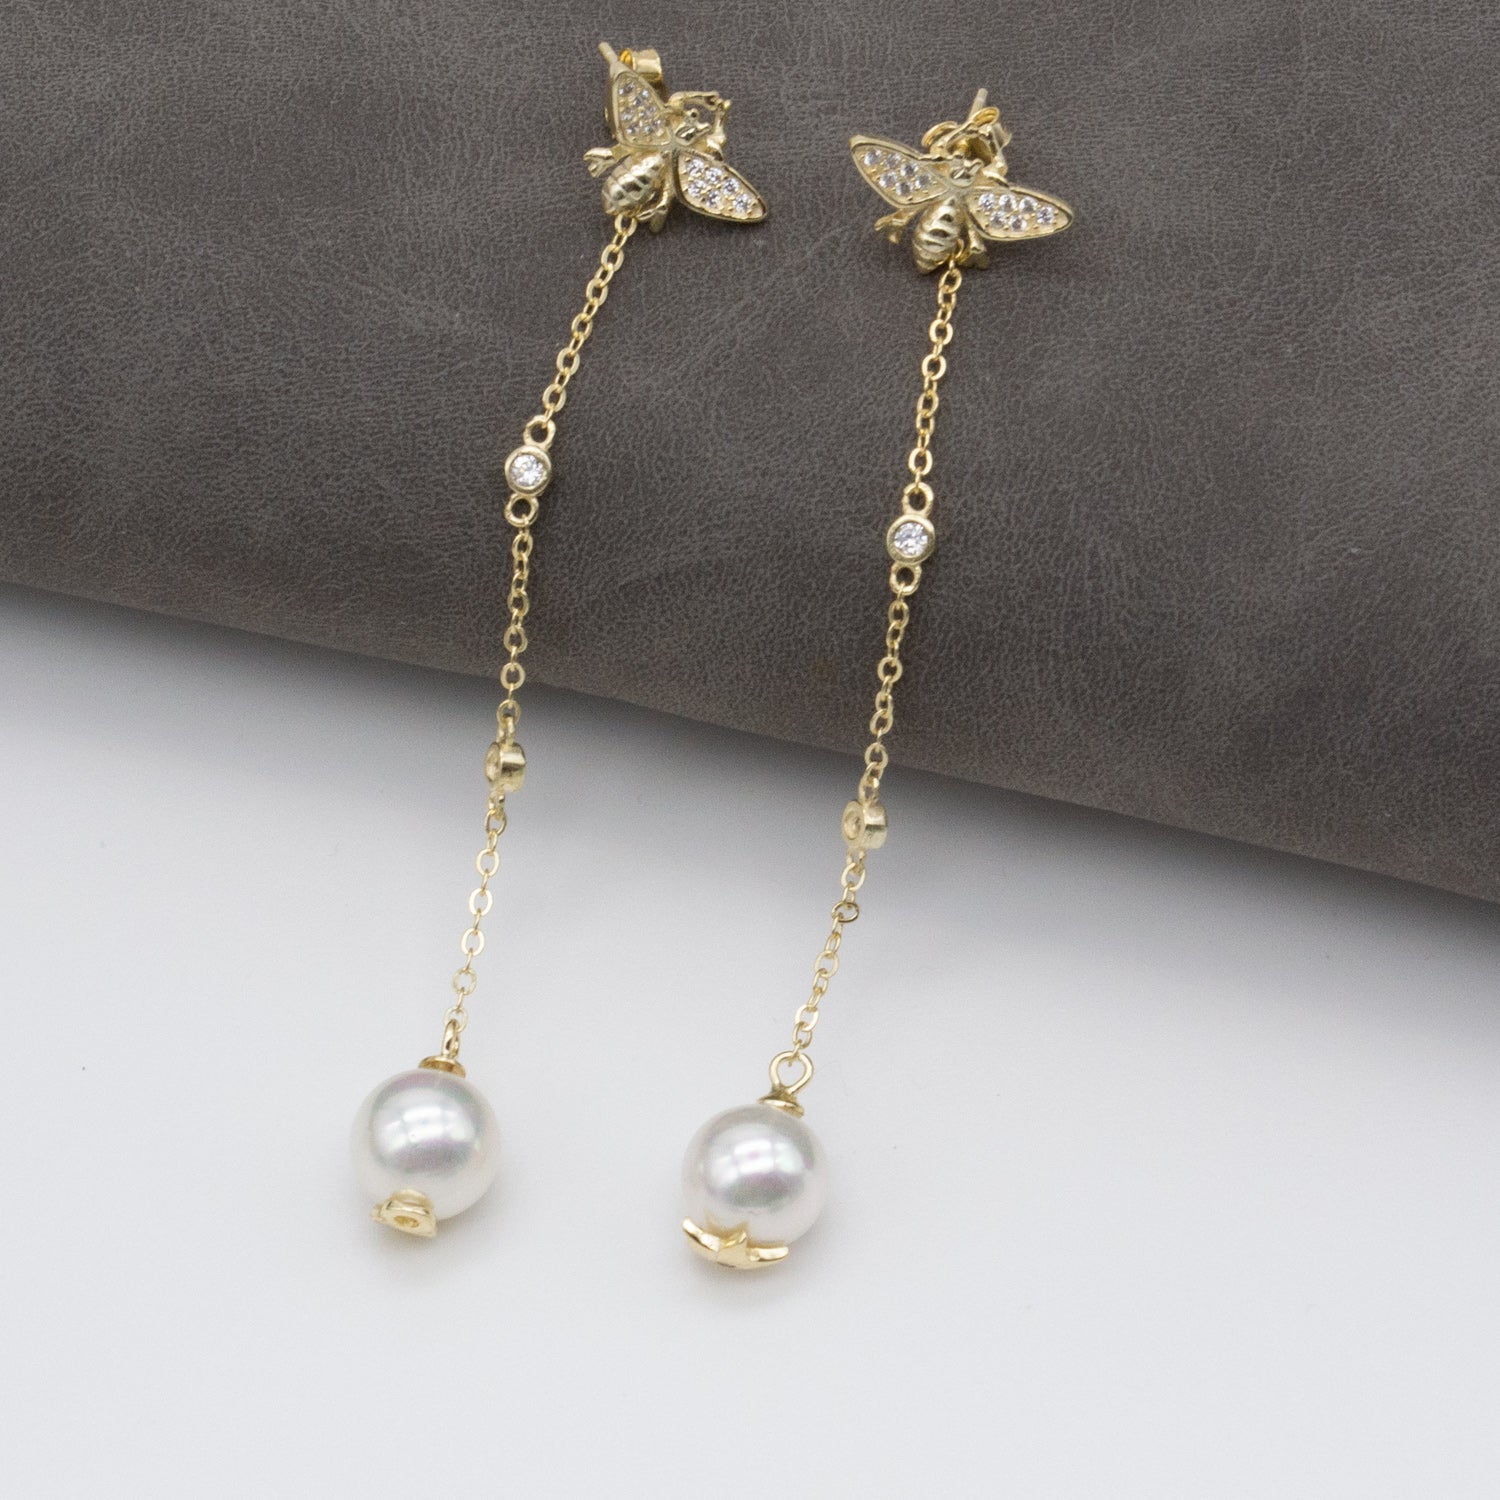 Jewdii 925 Sterling Silver Gold-plated Pearl Earrings